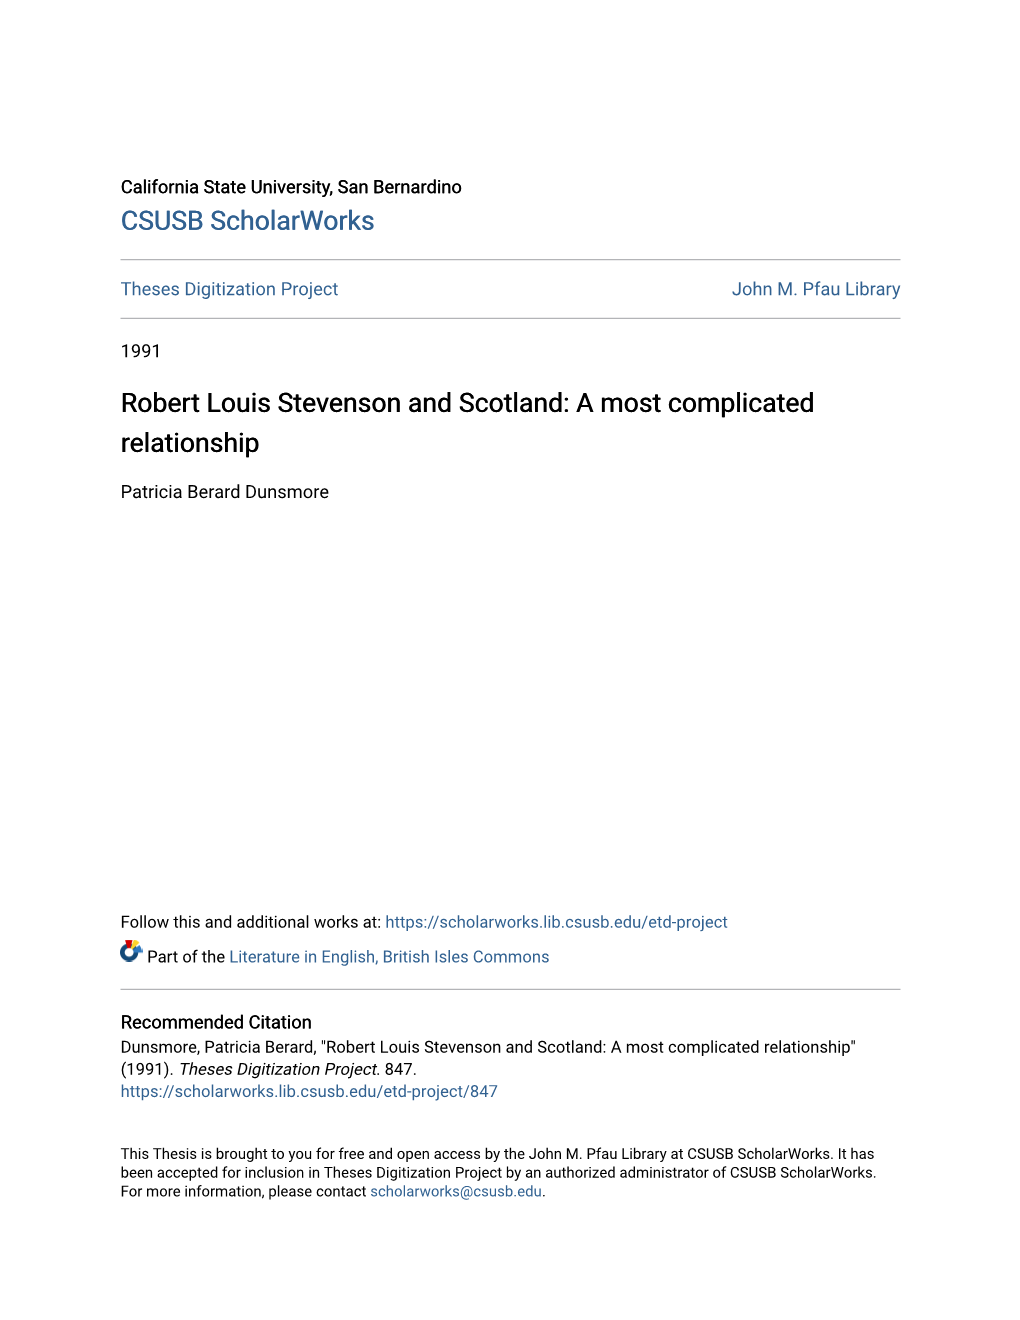 Robert Louis Stevenson and Scotland: a Most Complicated Relationship